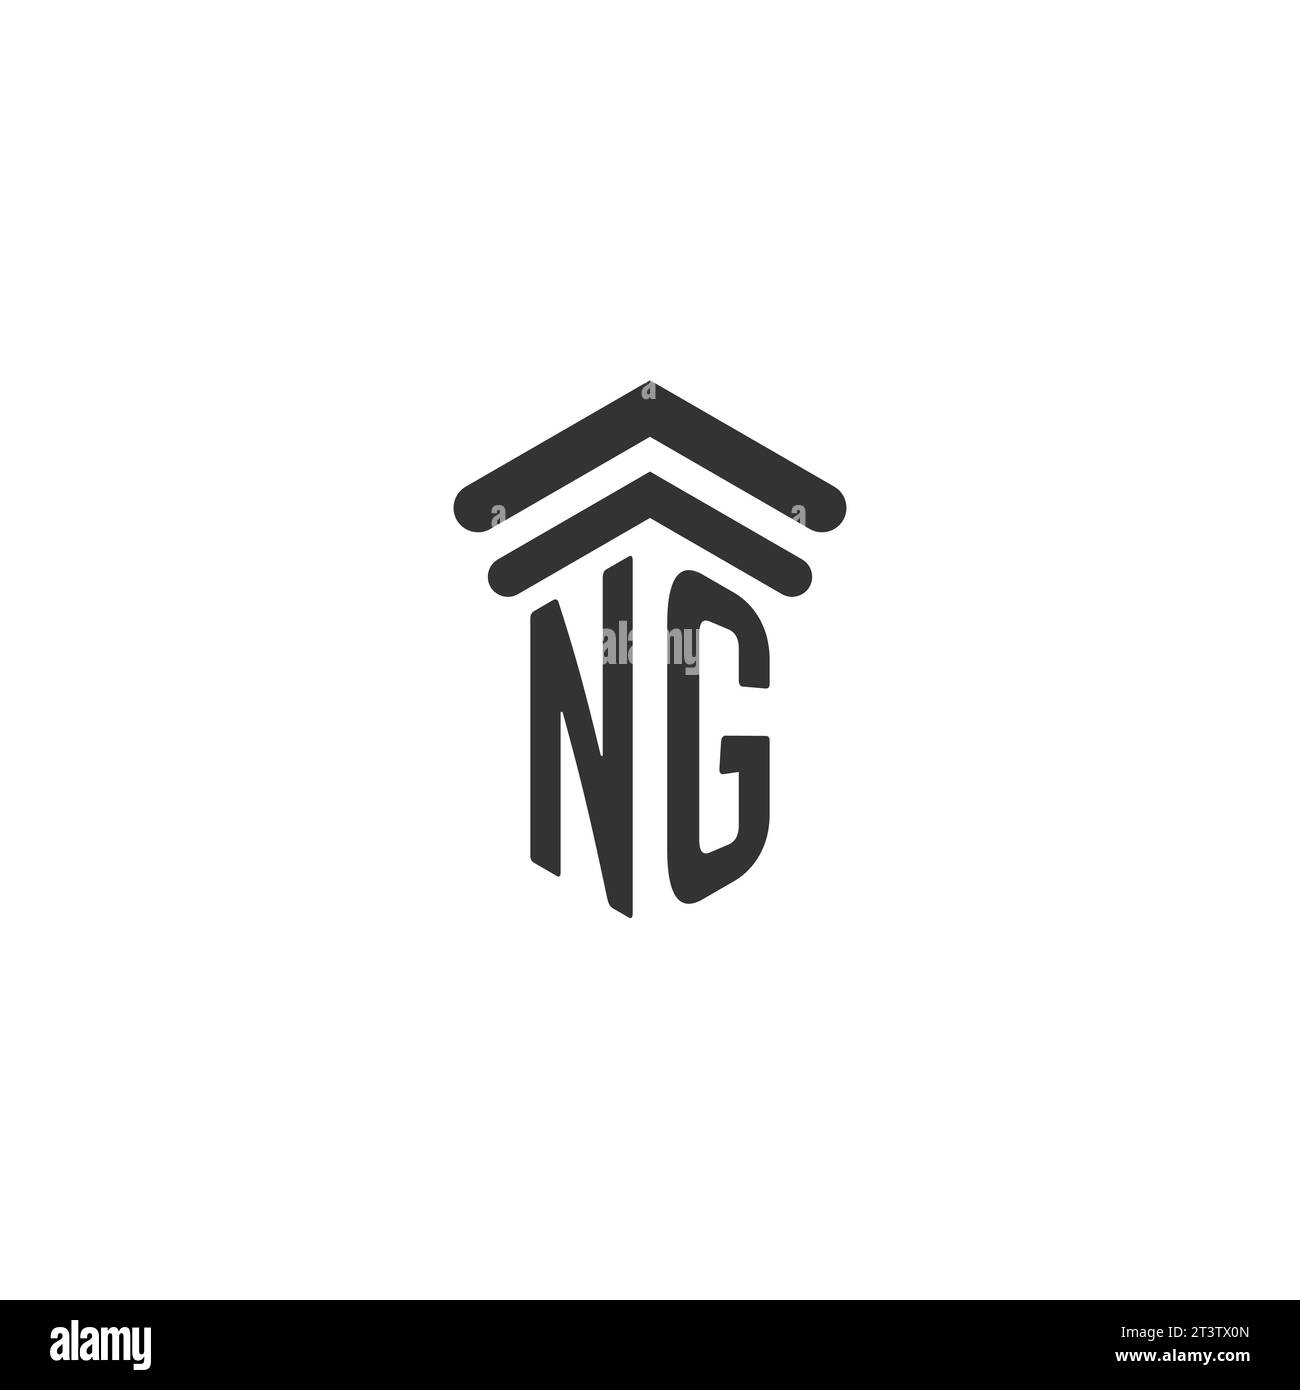 NG initial for law firm logo design template Stock Vector